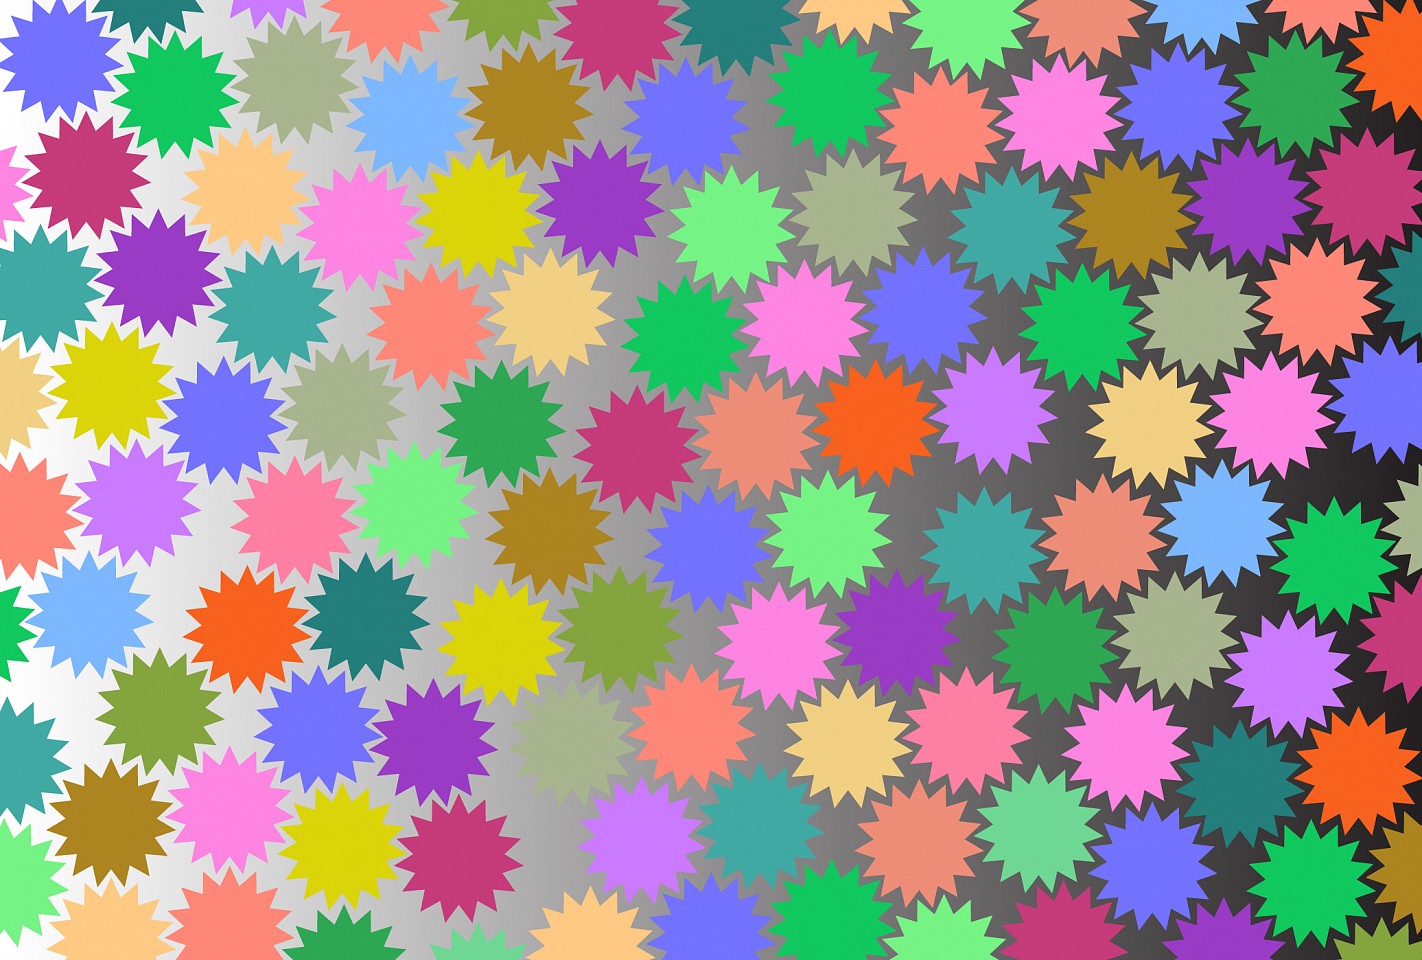 Dane Albert, Color Stars #6, 2023
Acrylic on canvas (Concept), 48 x 72 in. (121.9 x 182.9 cm)
Series of colored lines and shapes in multiple configurations
DA.2023.stars-006